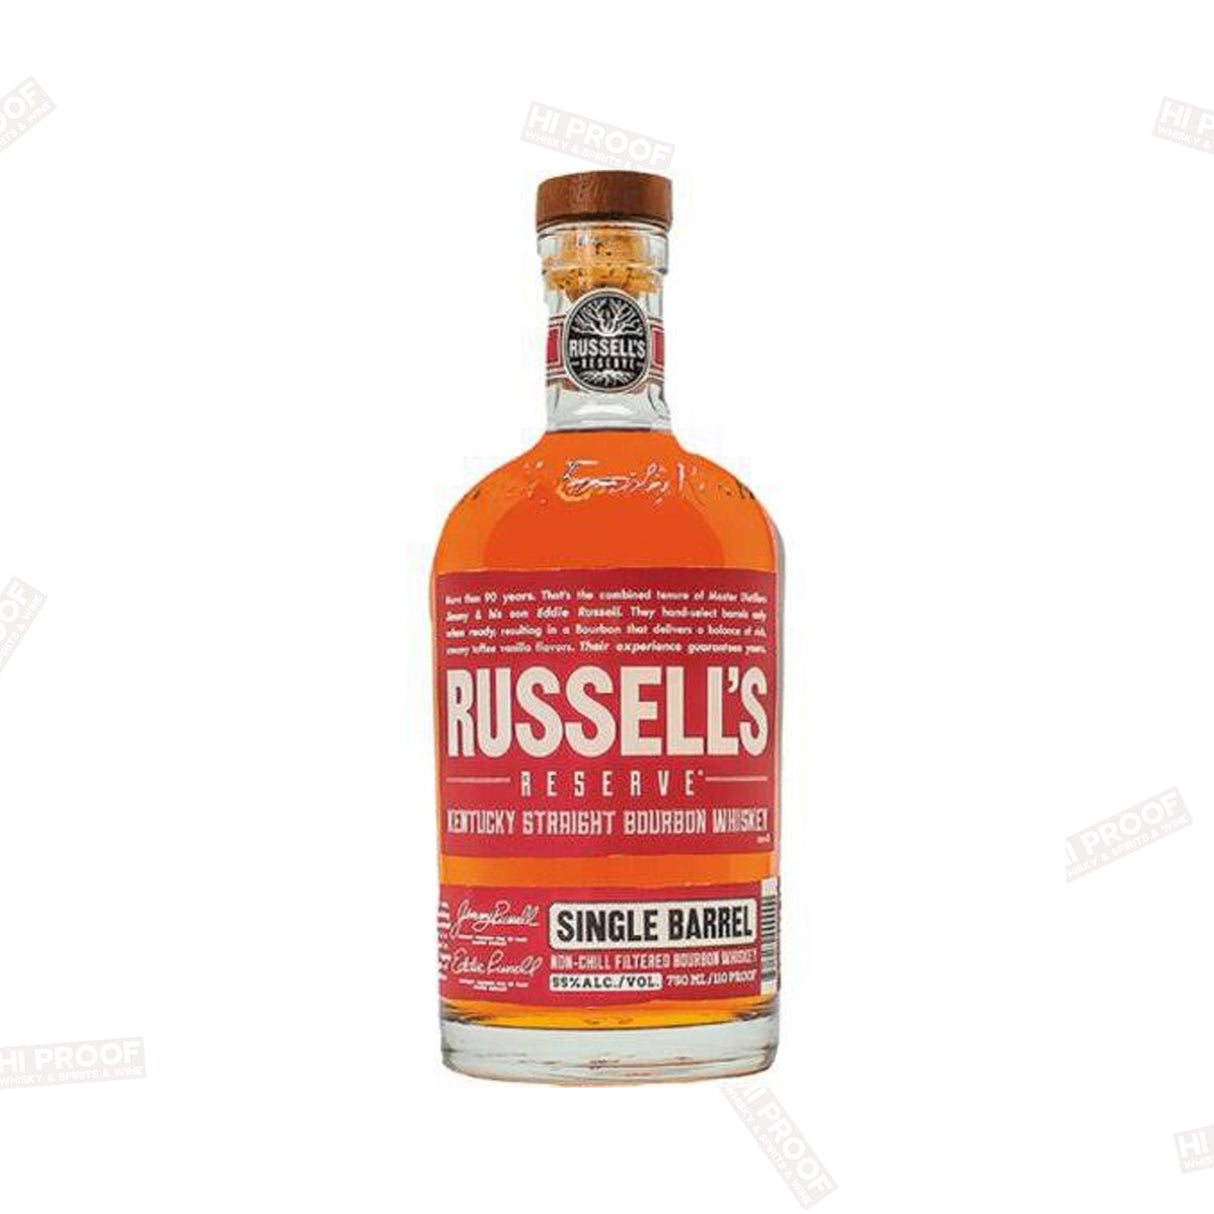 Russell’s Reserve Single Barrel 110 Proof - Hi Proof - Russell’s